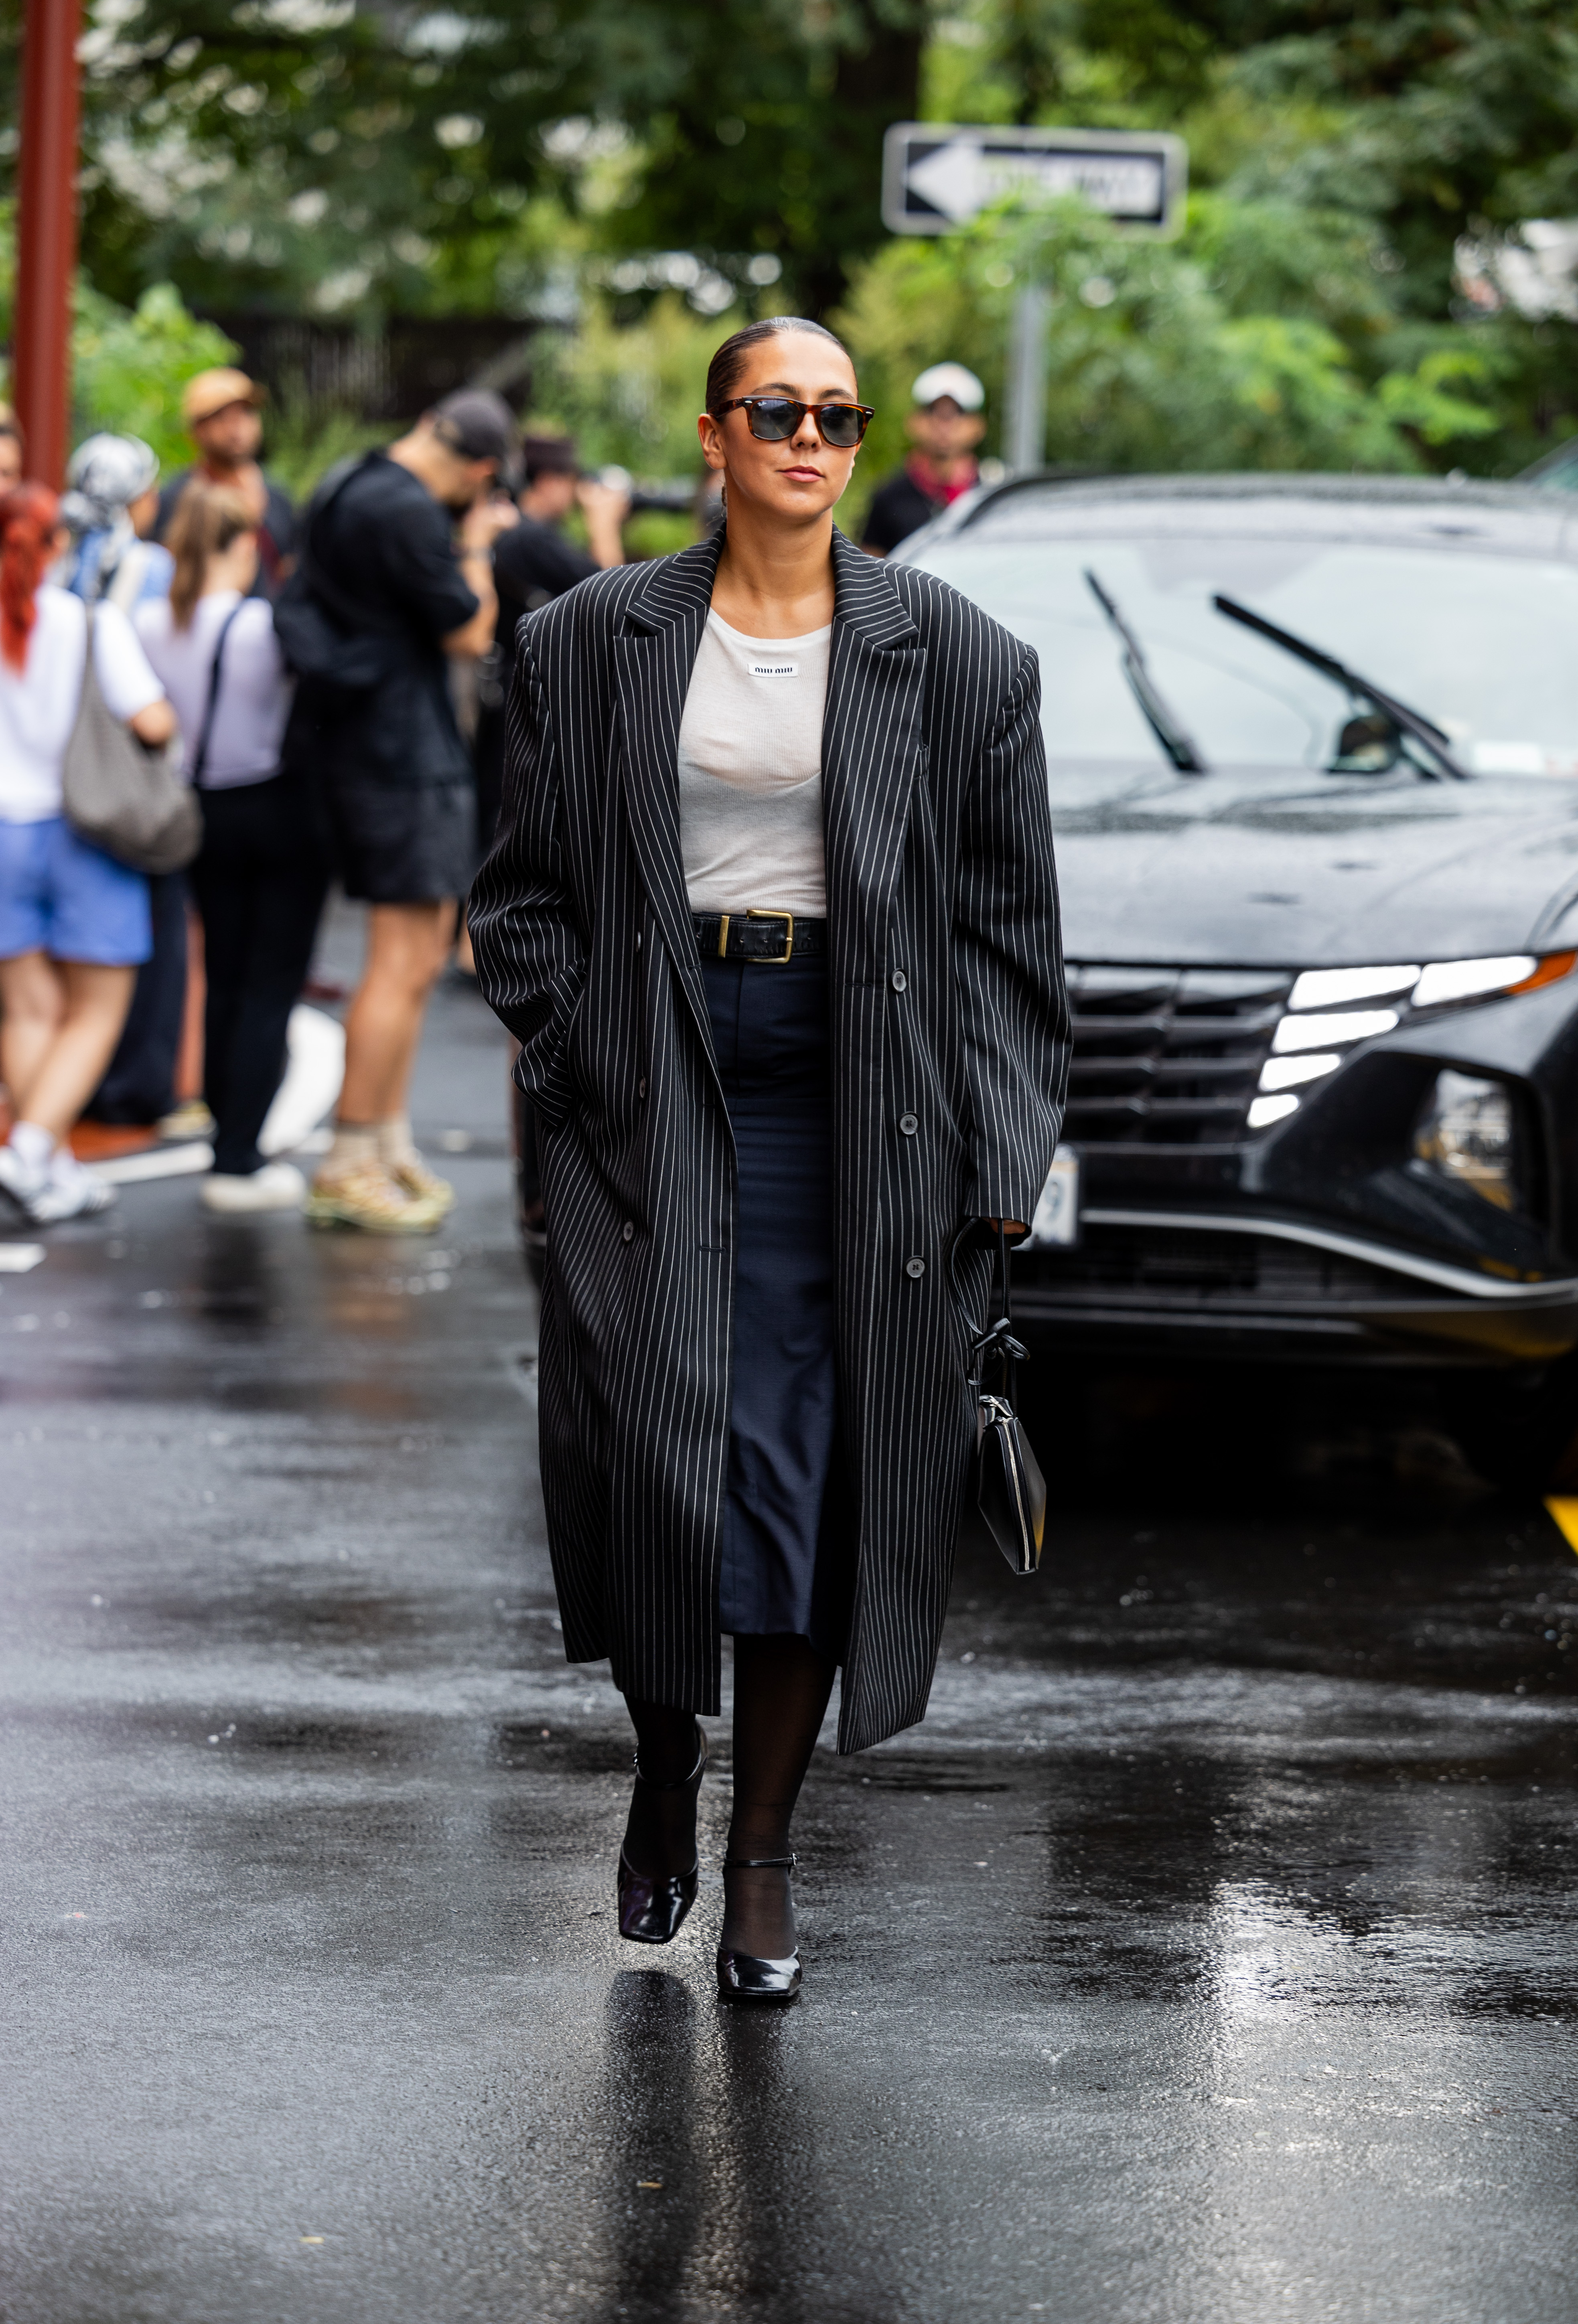 NYFW 2023: All The Best Street Style From The Spring '24 Shows